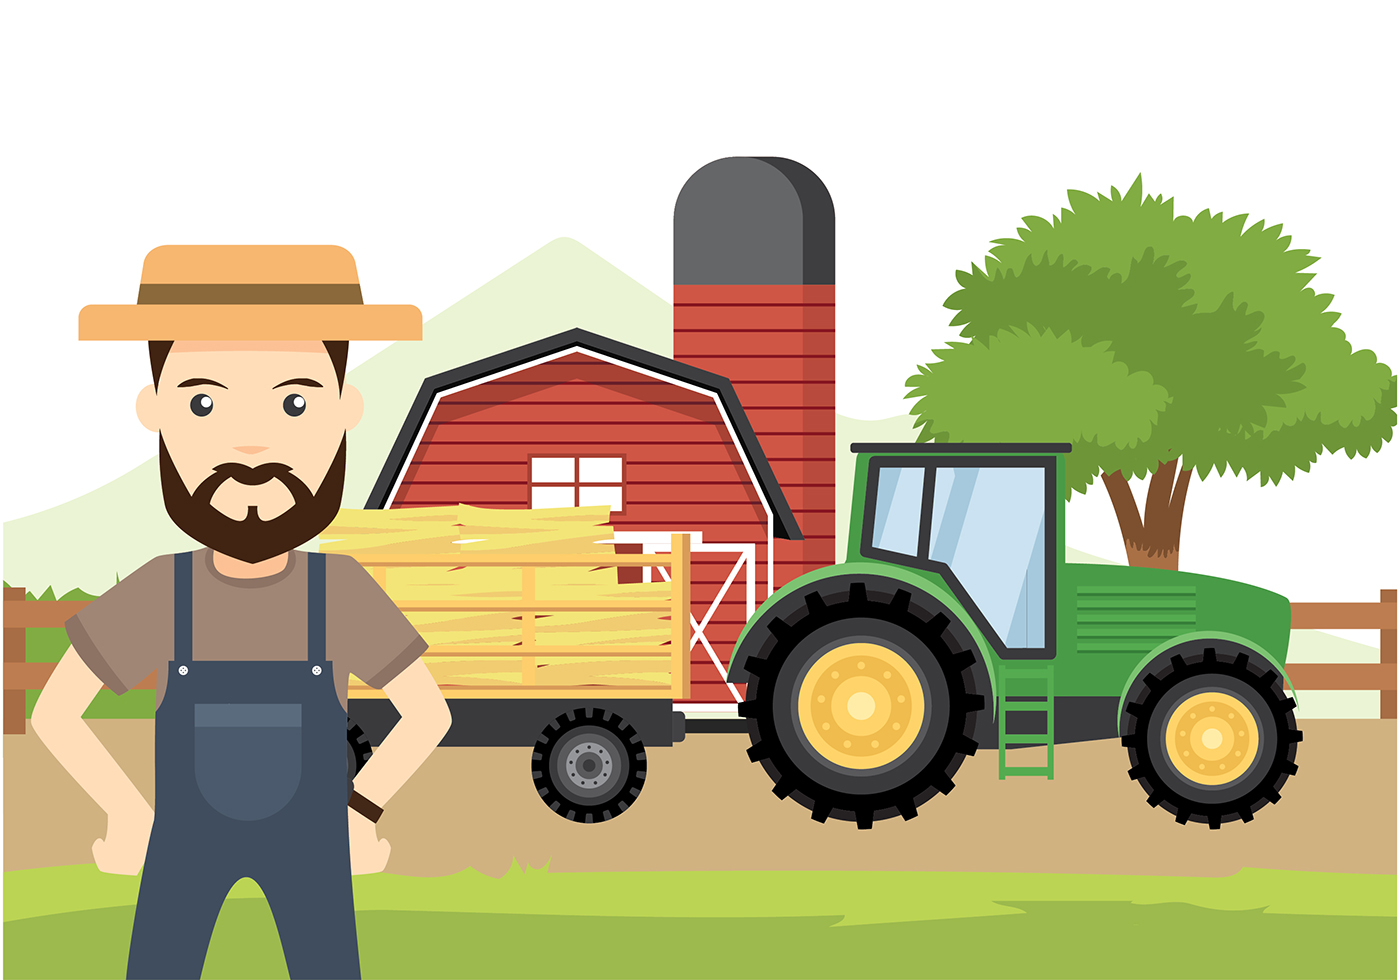 Download the Hayride With Farmer Free Vector 172273